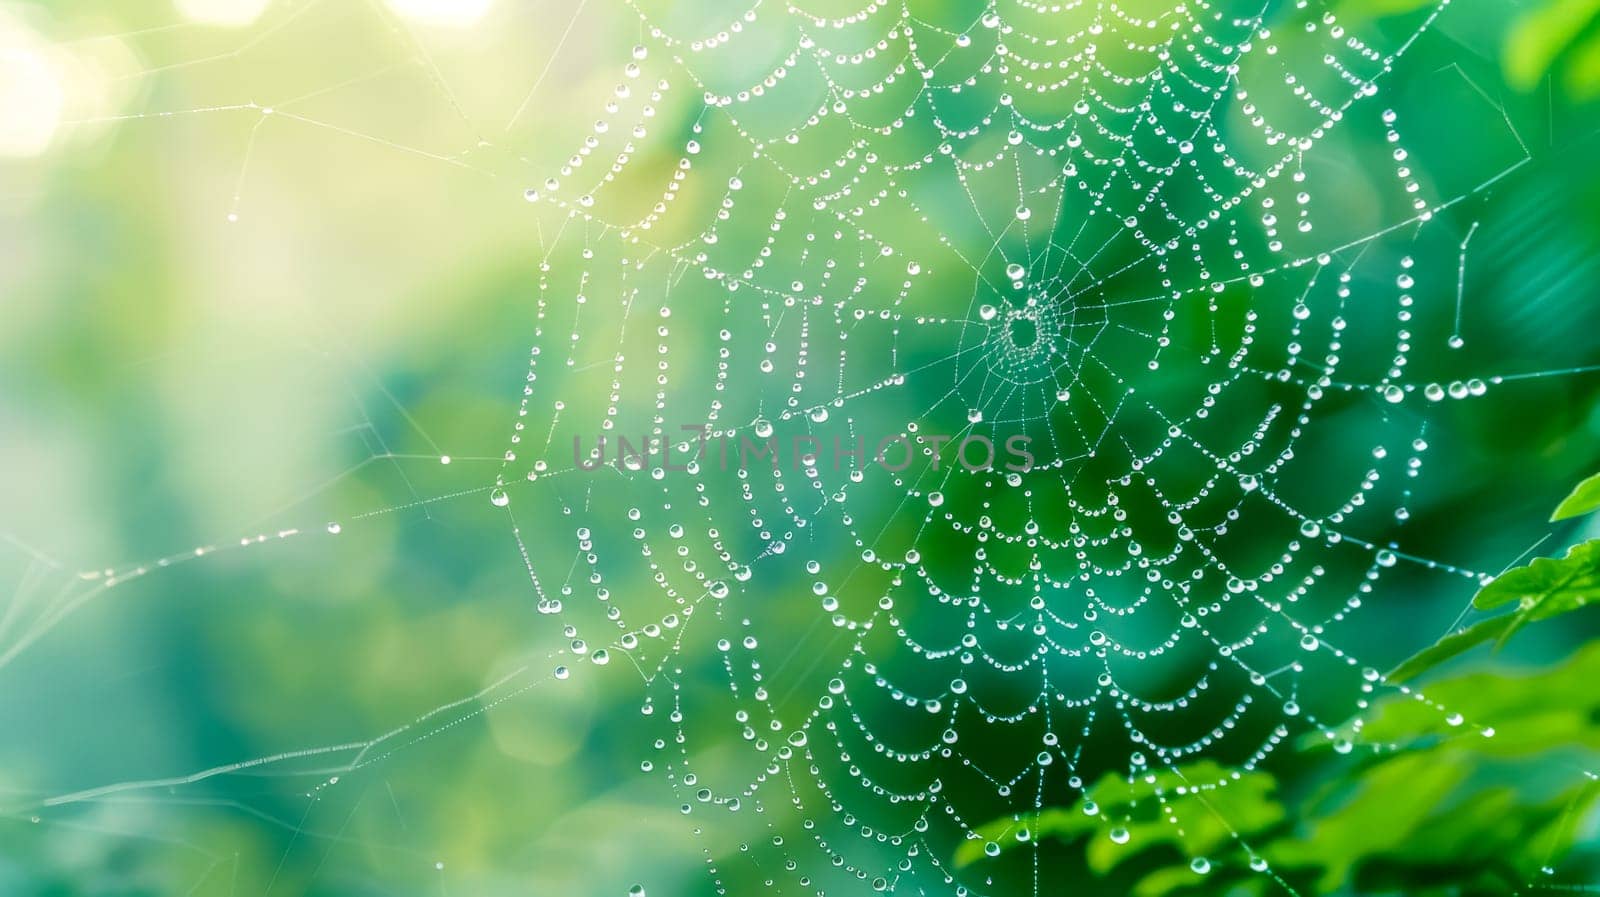 Morning dew on spiderweb in greenery by Edophoto